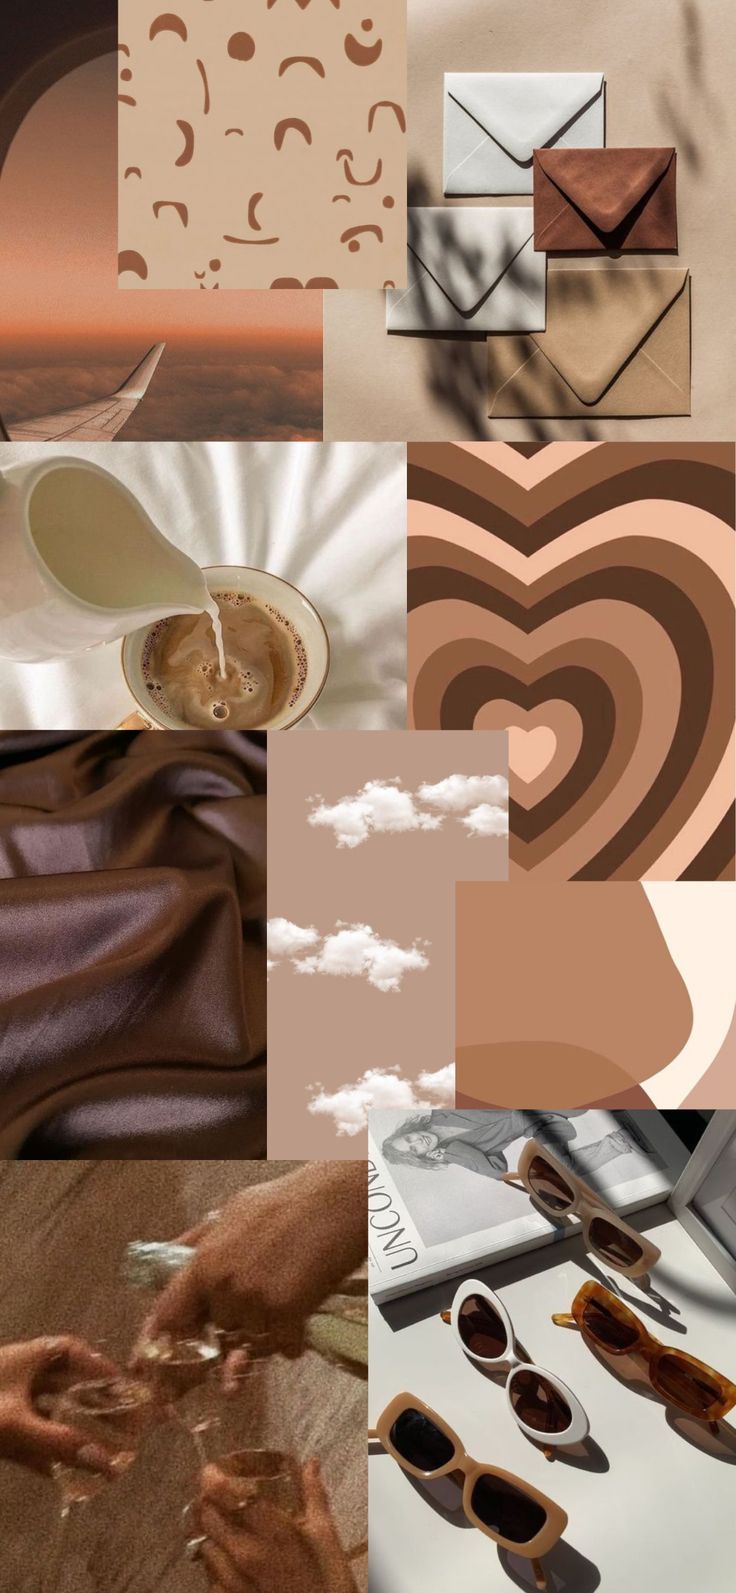 A collage of different colored and textured items - Light brown, paper